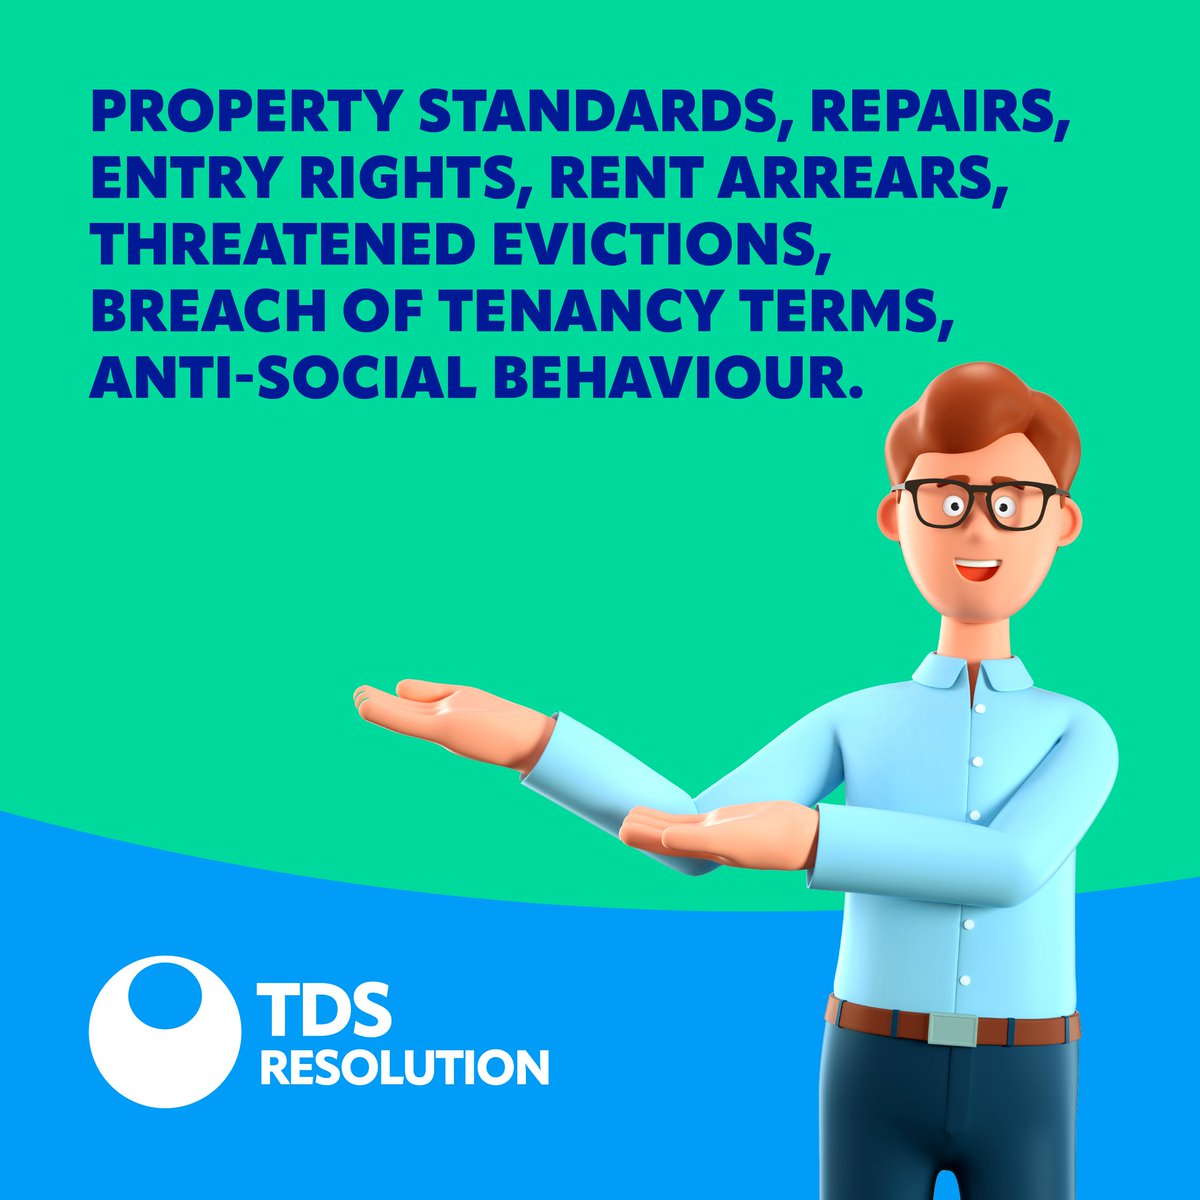 TDS Resolution: Bridging Landlord-Tenant Disputes 🏠 Our FREE and unbiased mediation service aims to resolve mid-tenancy disagreements. Let's navigate to common ground together.🤝 ow.ly/Wsrl50RoVxx #PropertyManagement #DisputeResolution